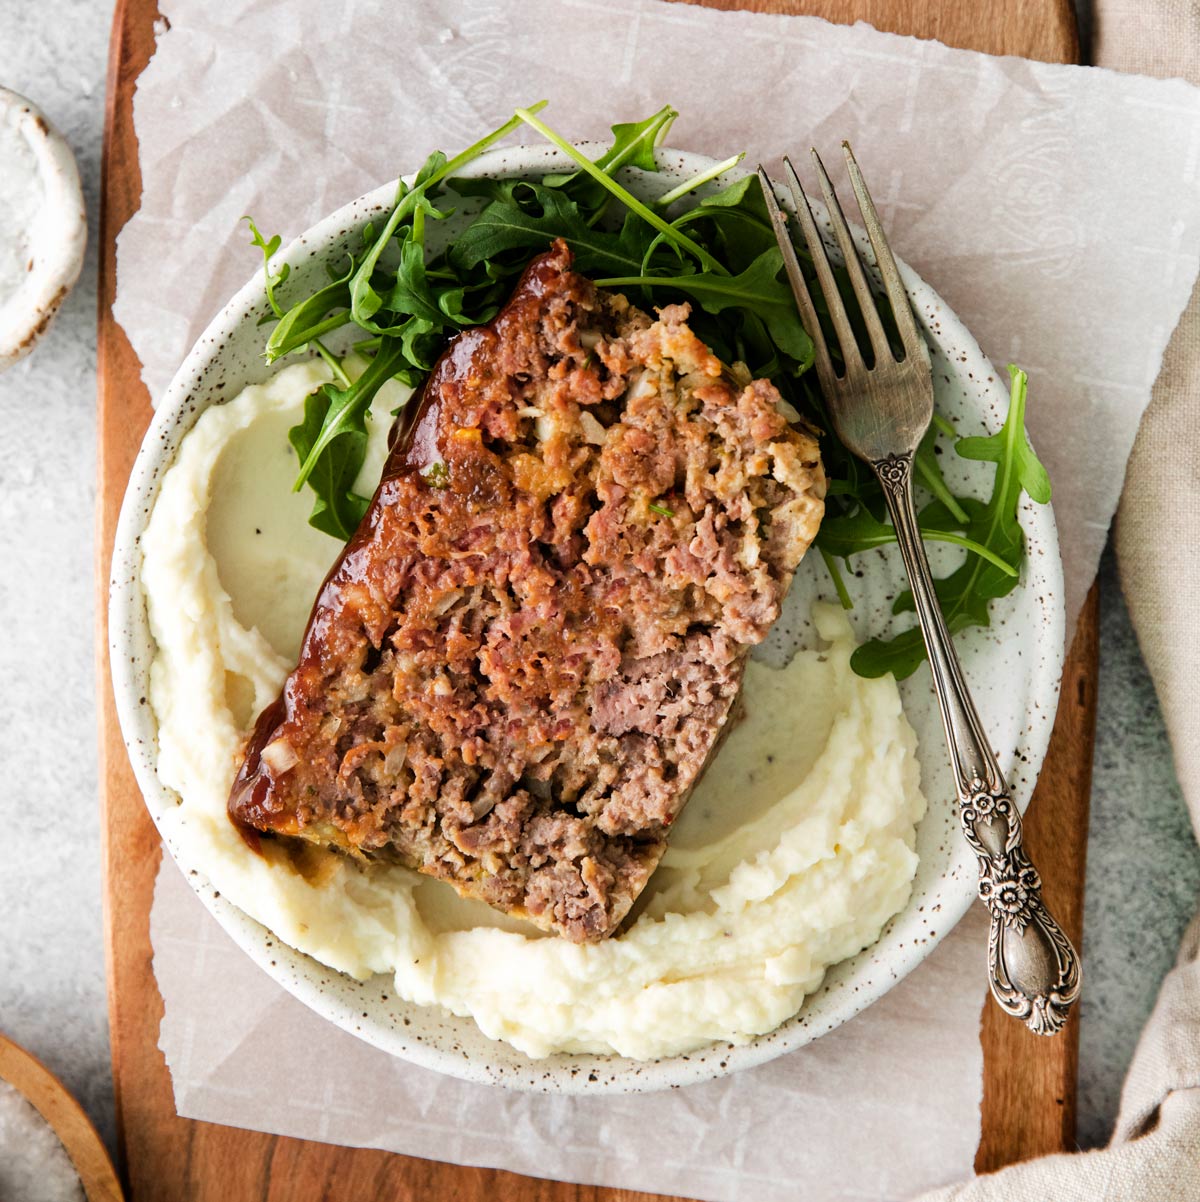 a sliced of BBQ glazed meatloaf on a plate with mashed potatoes and greens.